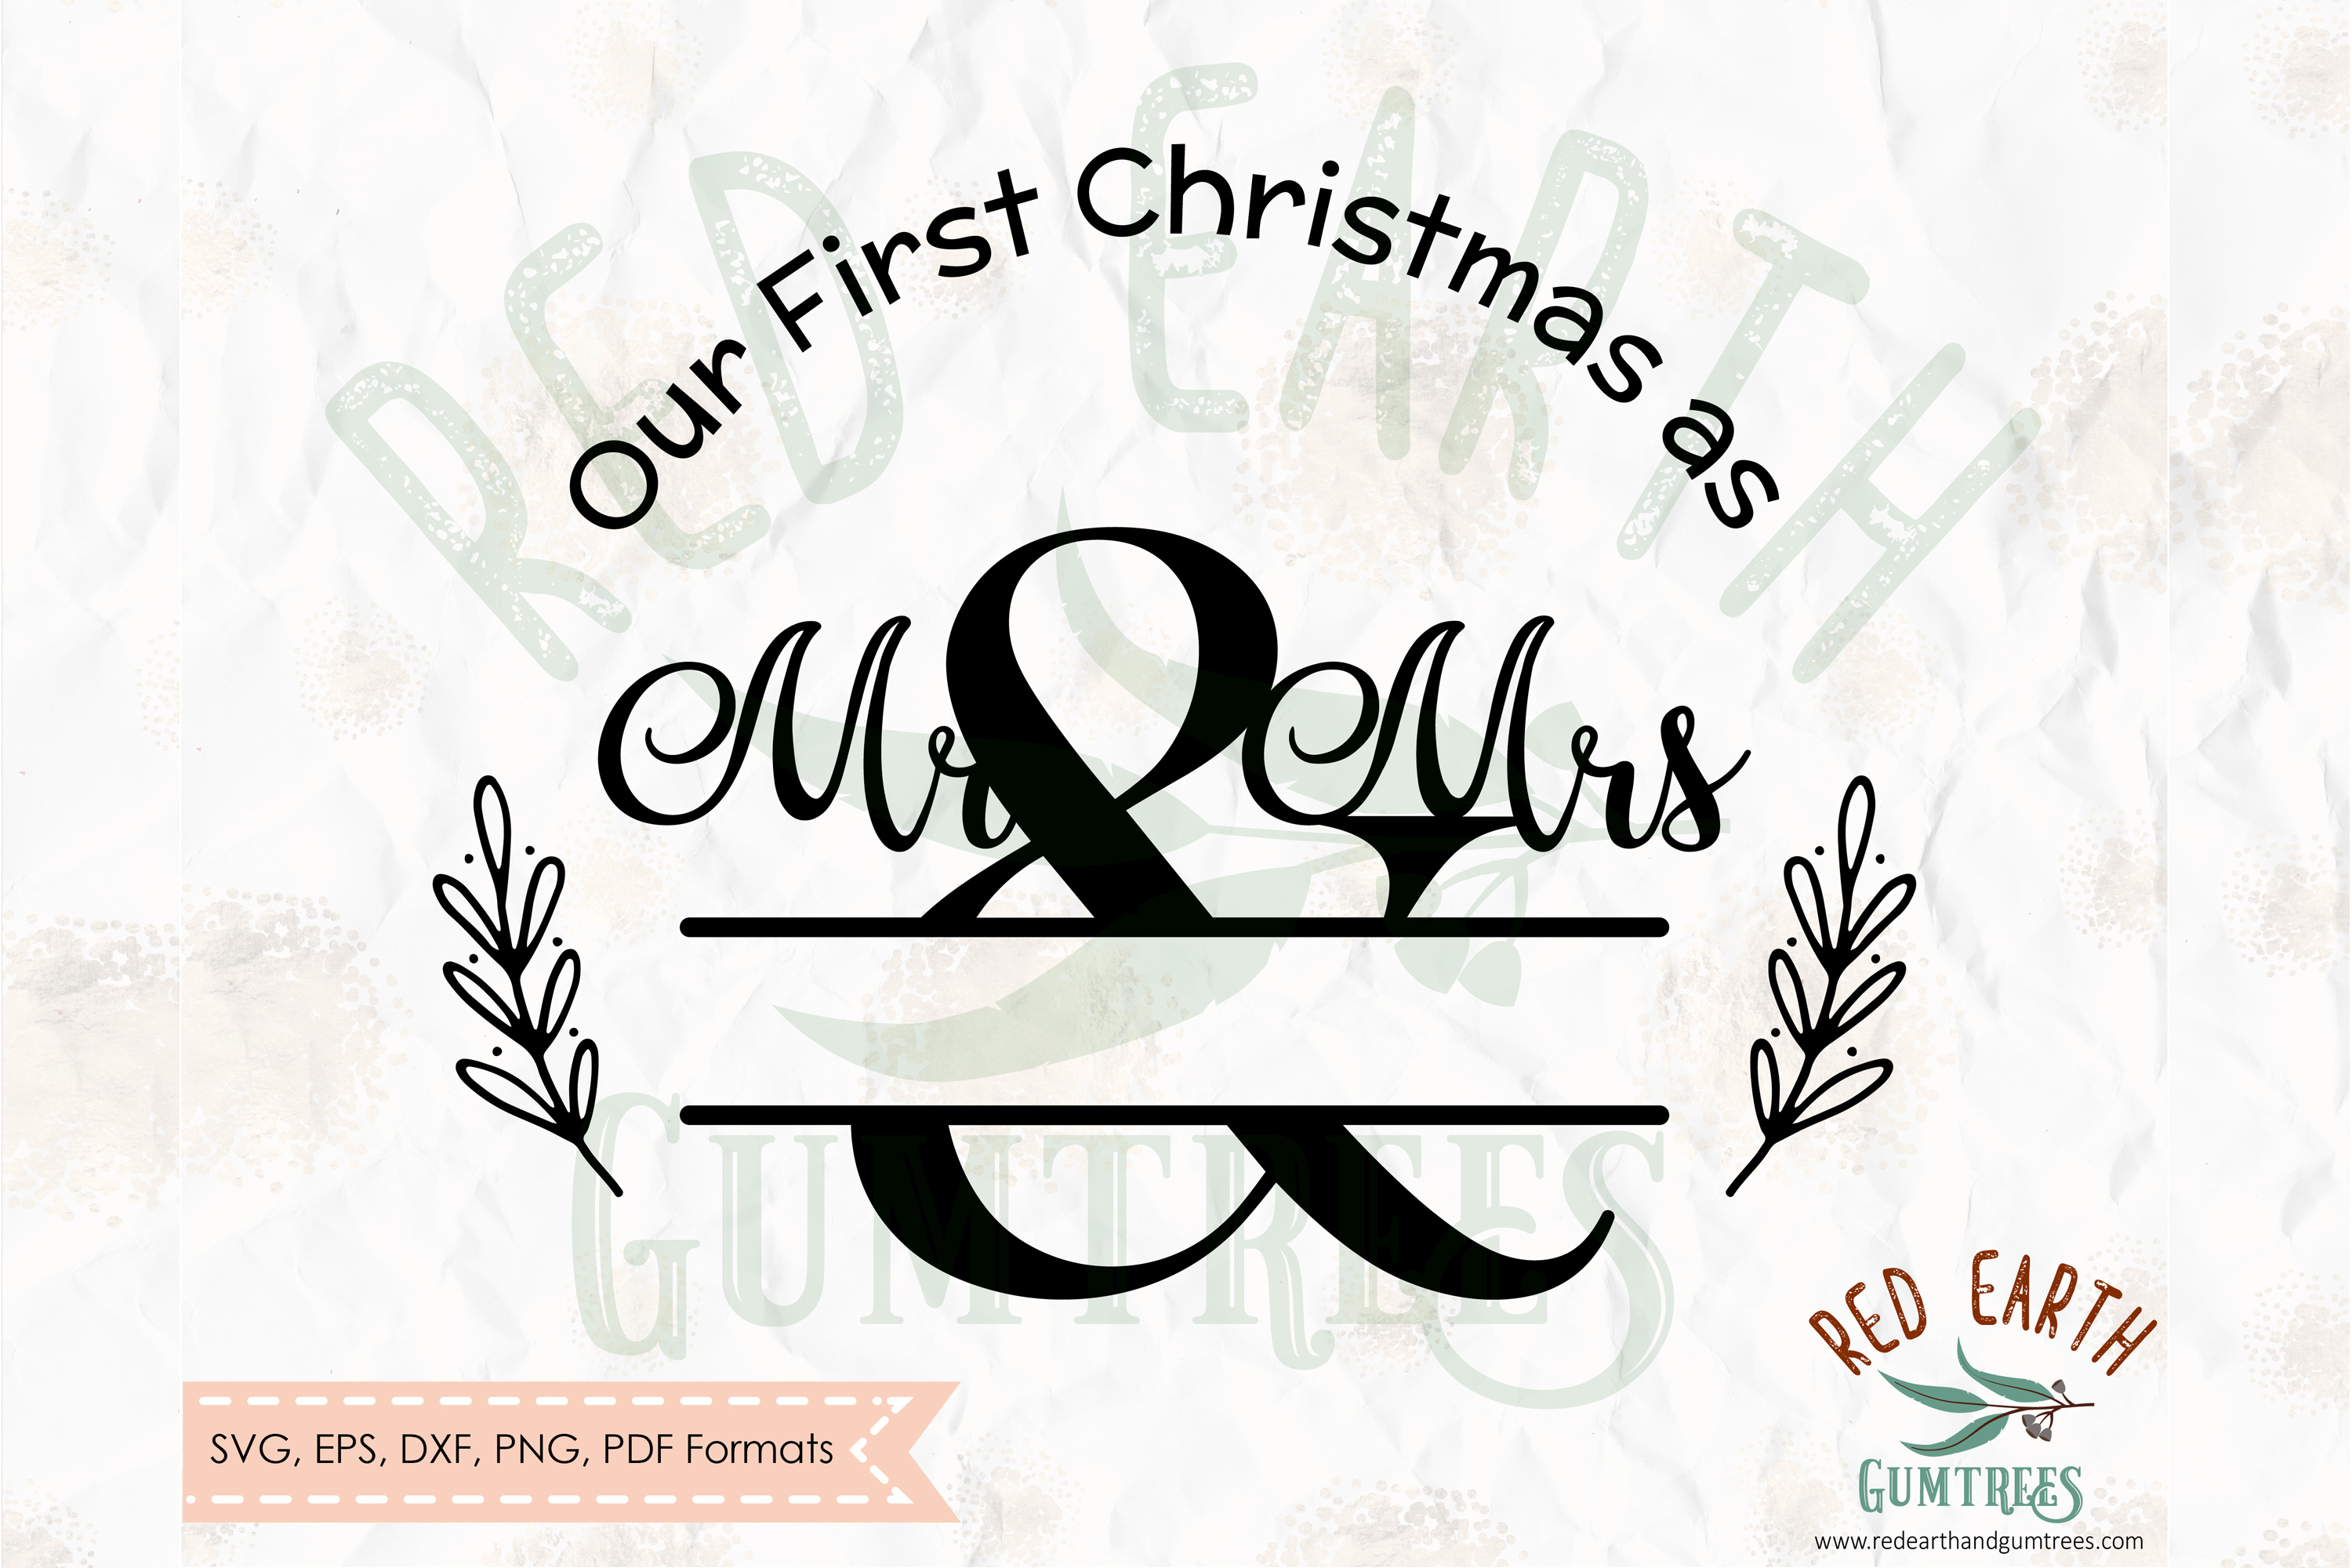 Download Our first Christmas as Mr and Mrs decal SVG,PNG,DXF,EPS,PDF